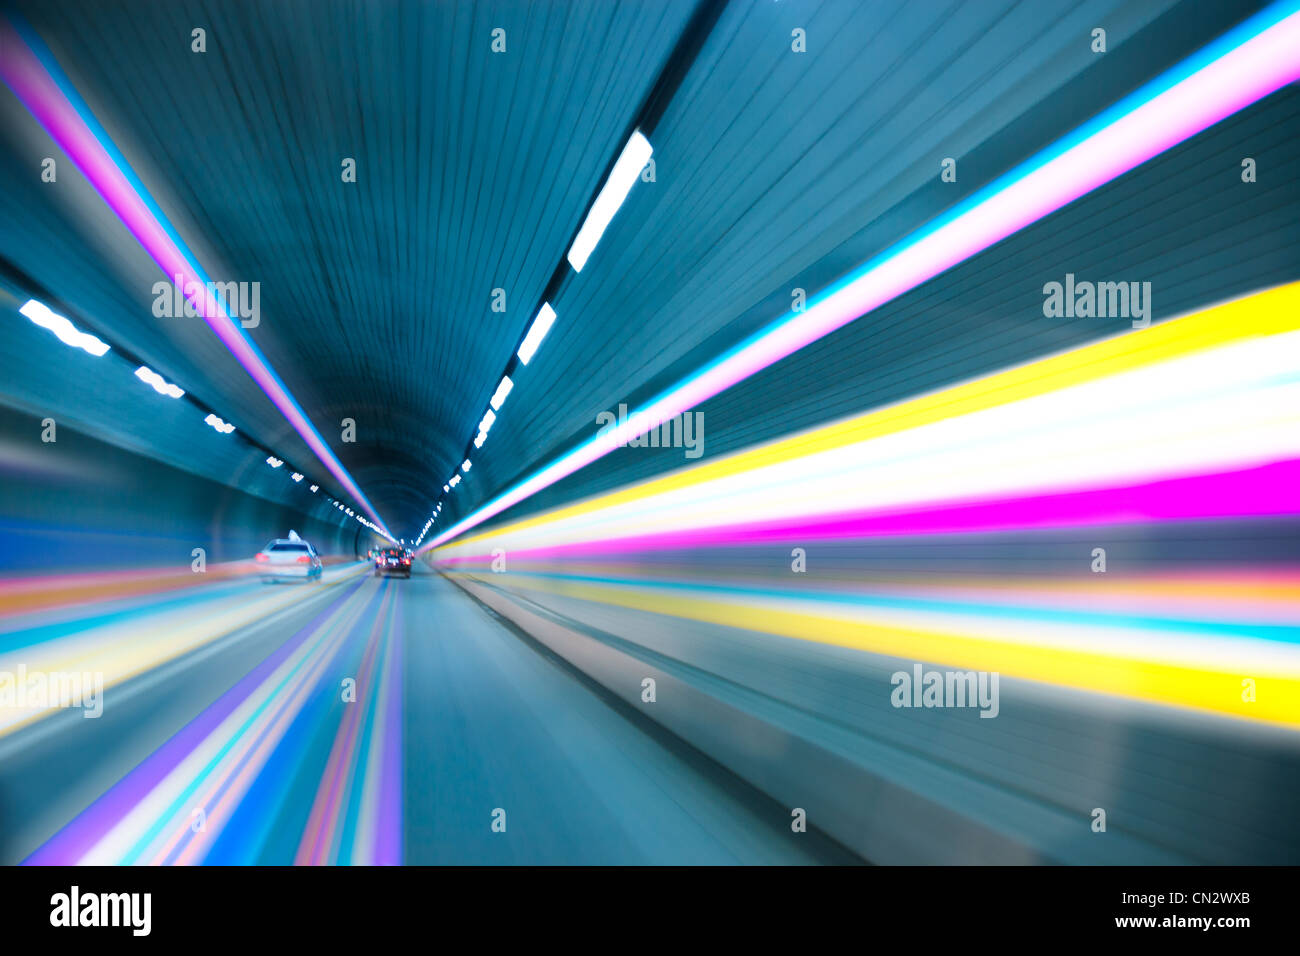 Abstract speed motion in urban highway road tunnel, blurred motion toward the light Stock Photo